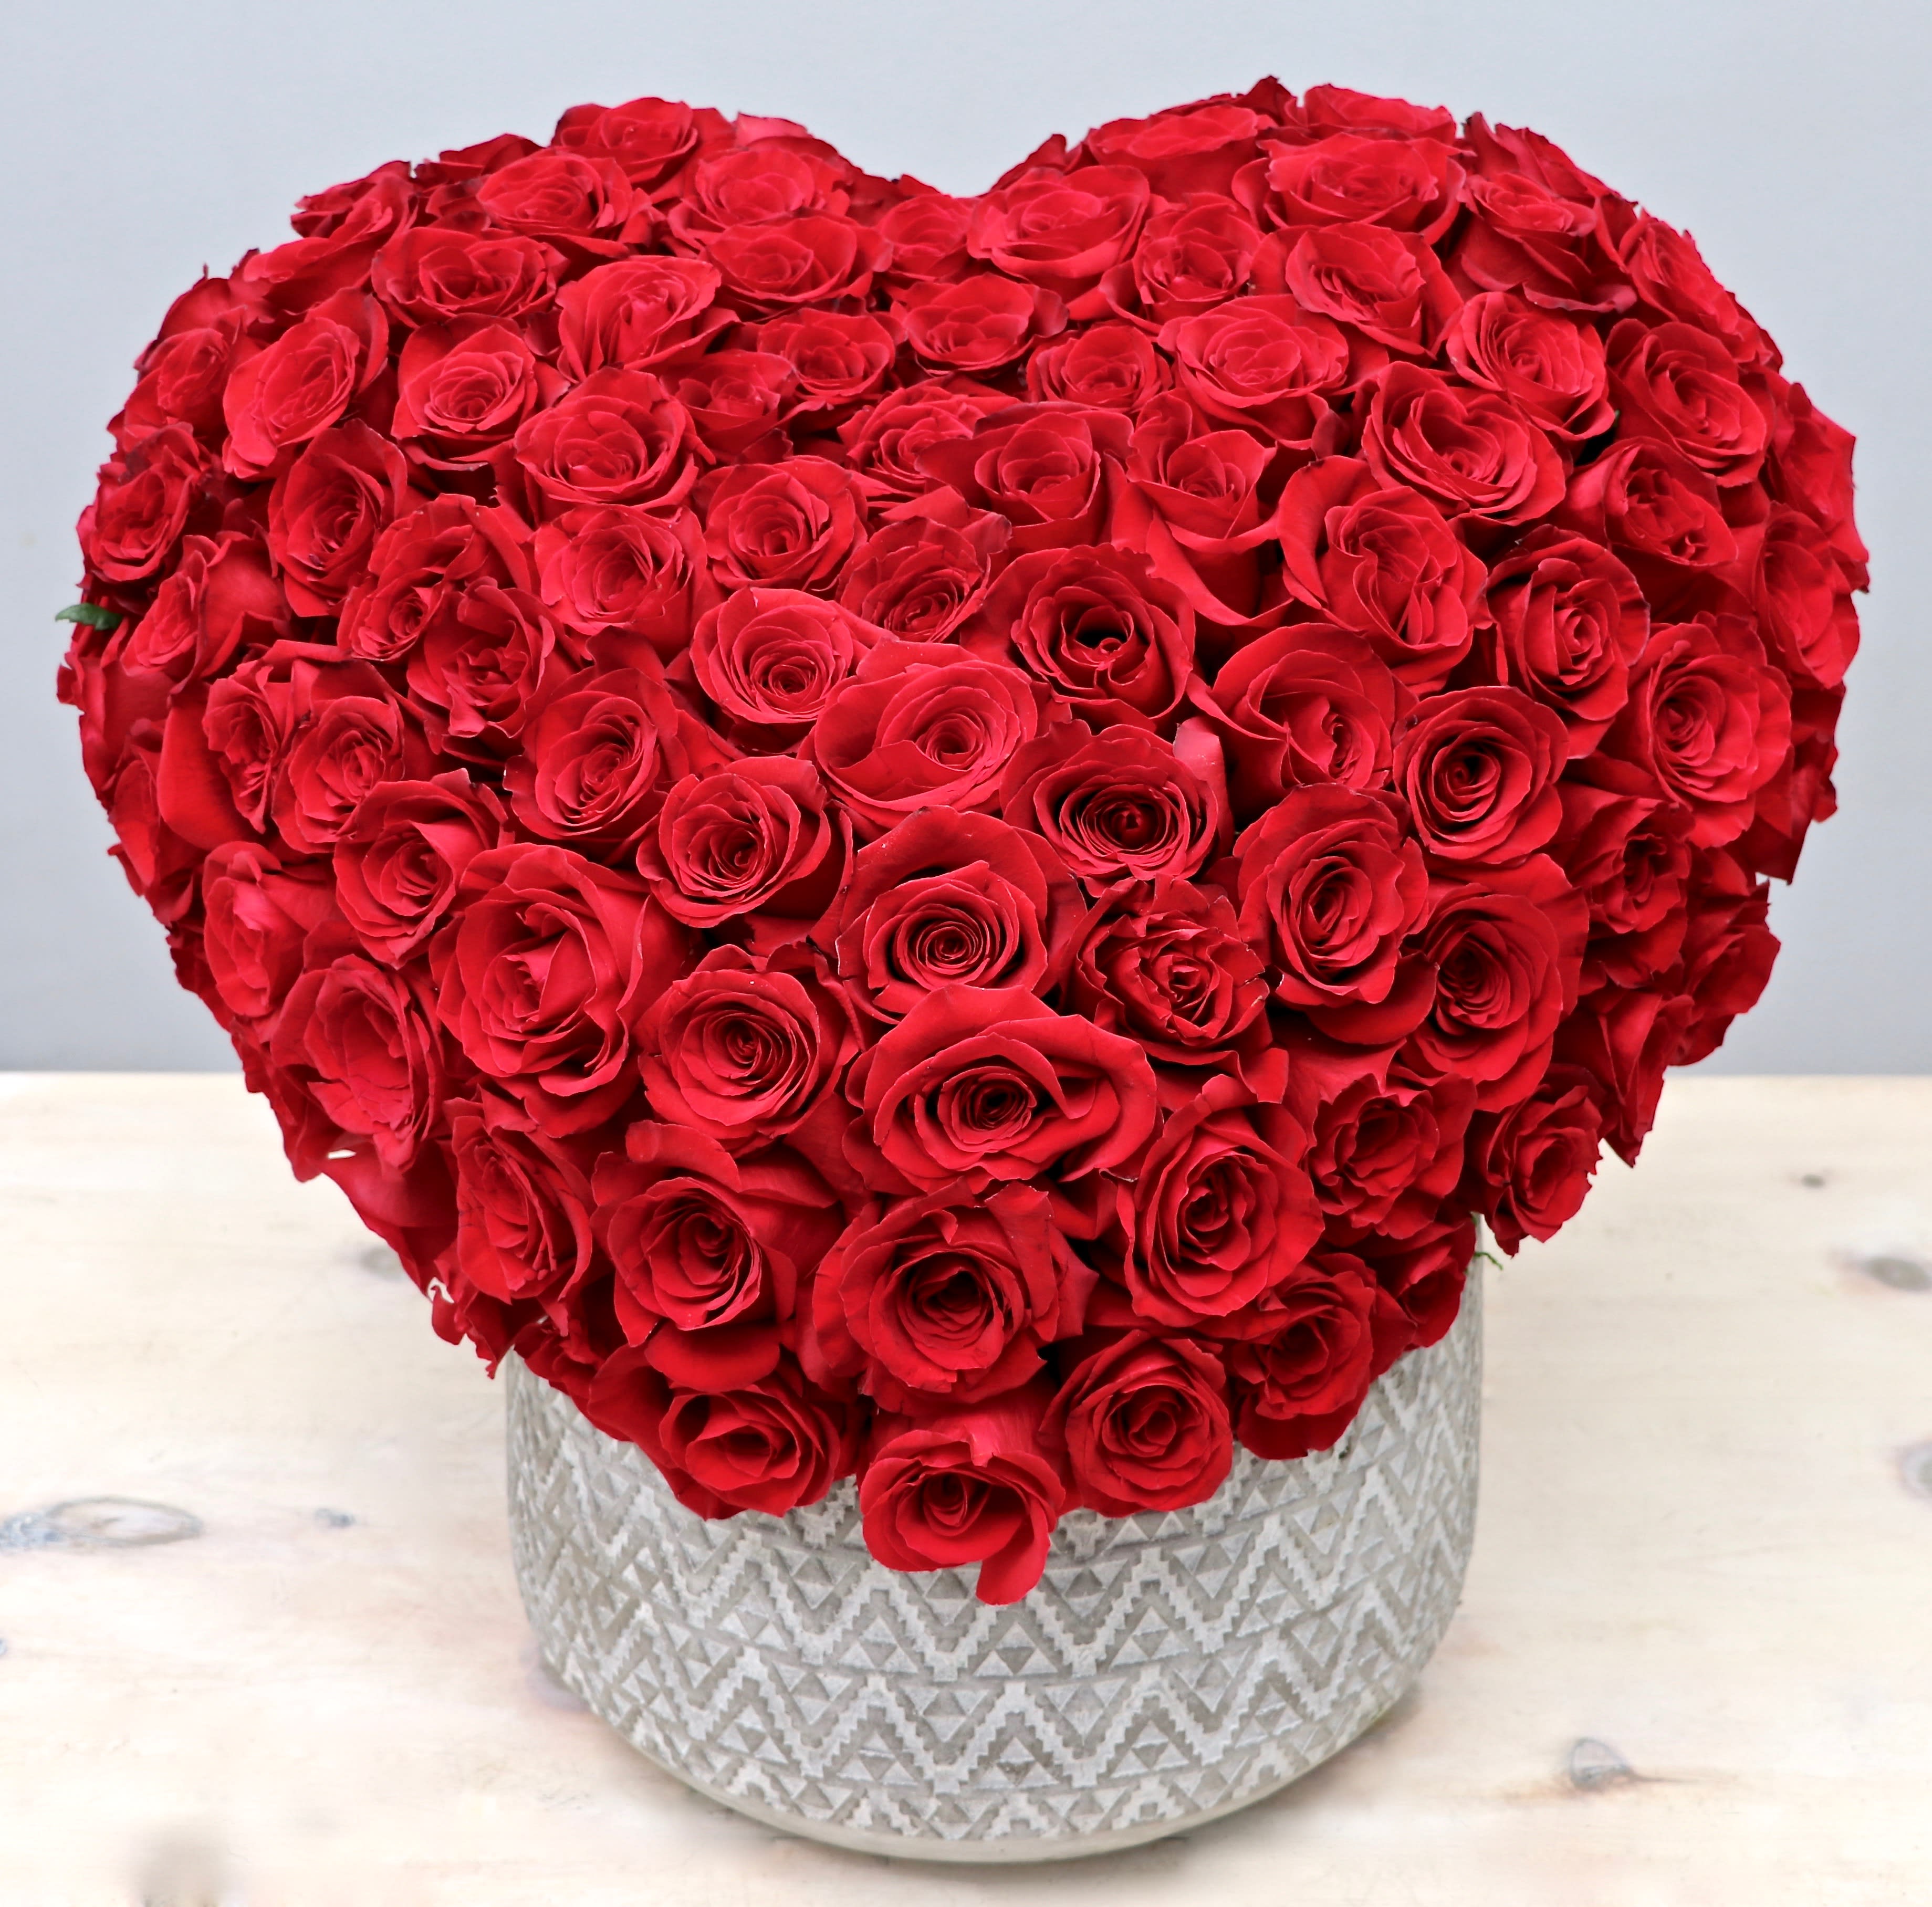 Heart Valentine - Glendale Florist - This hand crafted heart arrangement consists of 100 premium red roses. Make sure to upgrade to deluxe or premium to make this arrangement even more of a statement. Deluxe size holds 125 roses, while premium size holds 150 roses.  Let us know what color you would like in the florist instructions box at checkout. 